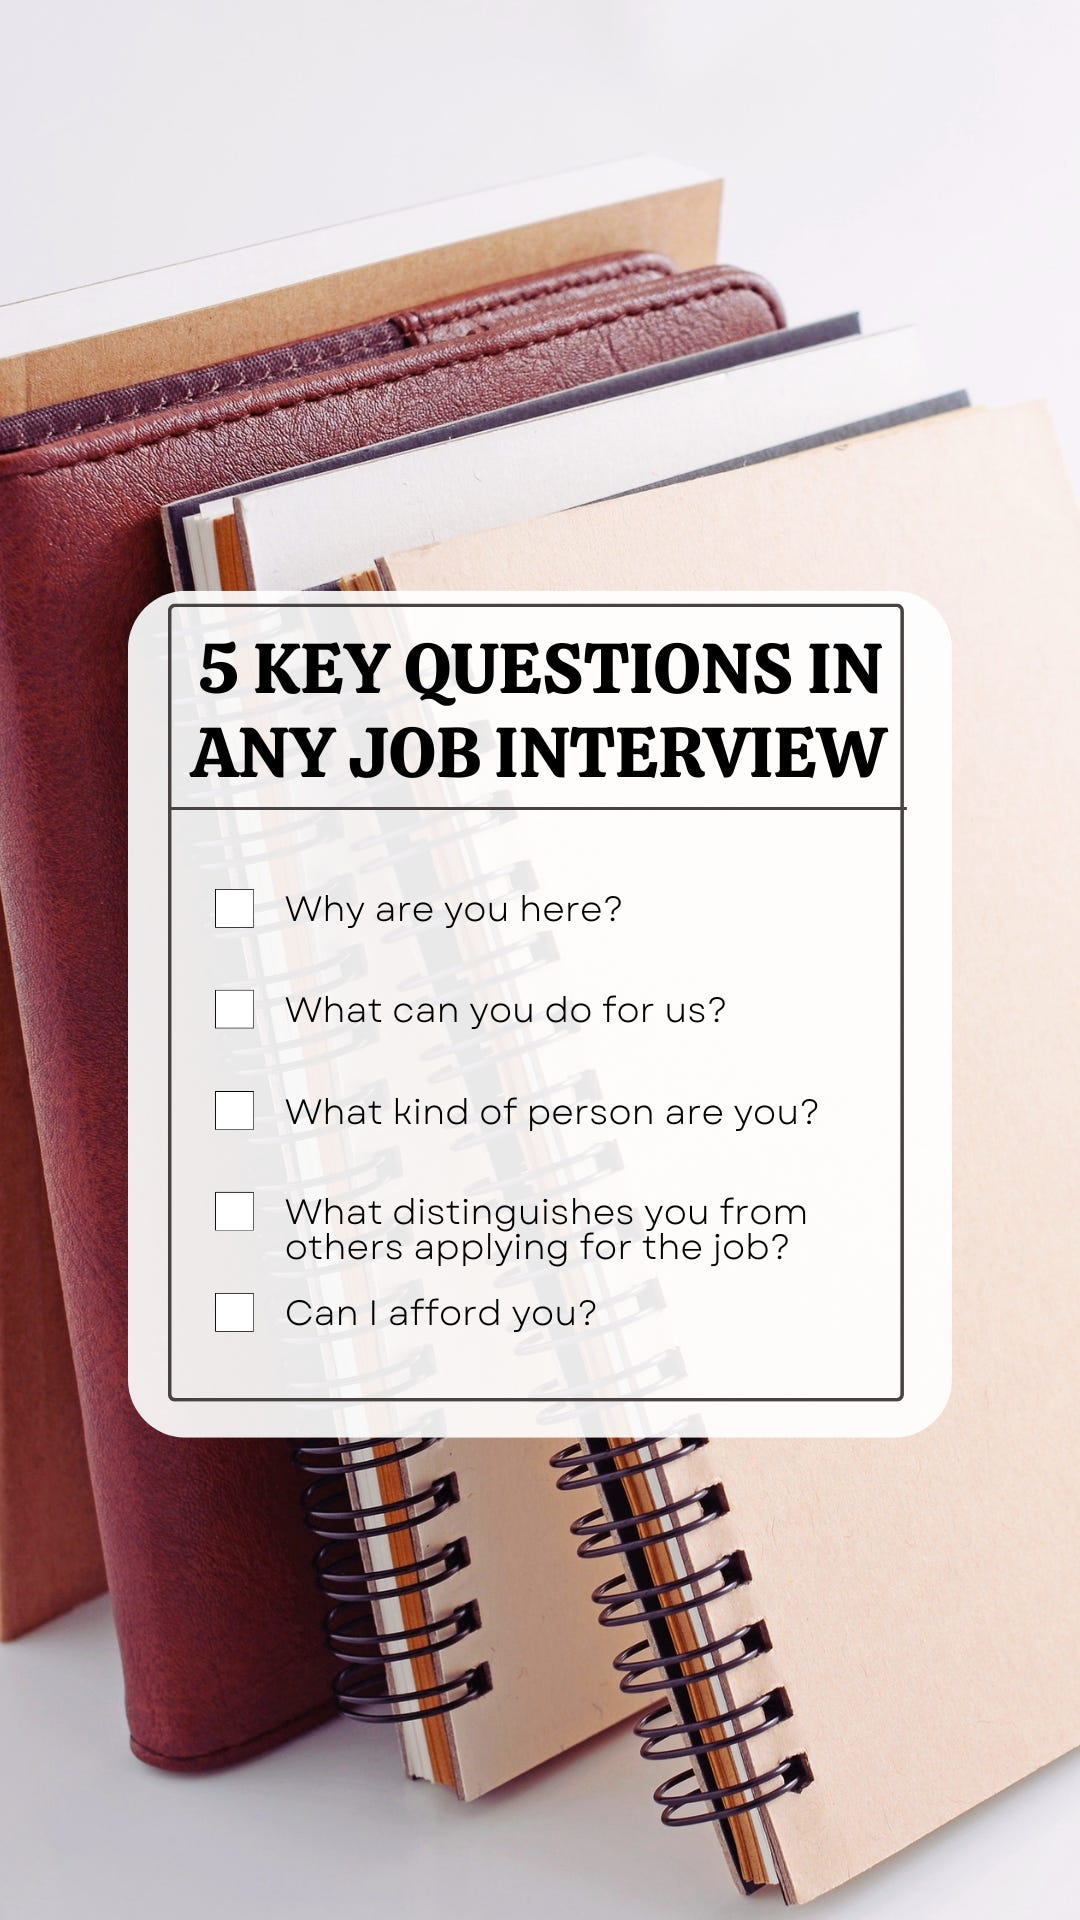 According to Richard Bolles, there are five Key Questions in Any Job Interview: 1) Why are you here? 2) What can you do for us? 3) What kind of person are you? 4) What distinguishes you from others applying for the job? 5) Can I afford you?